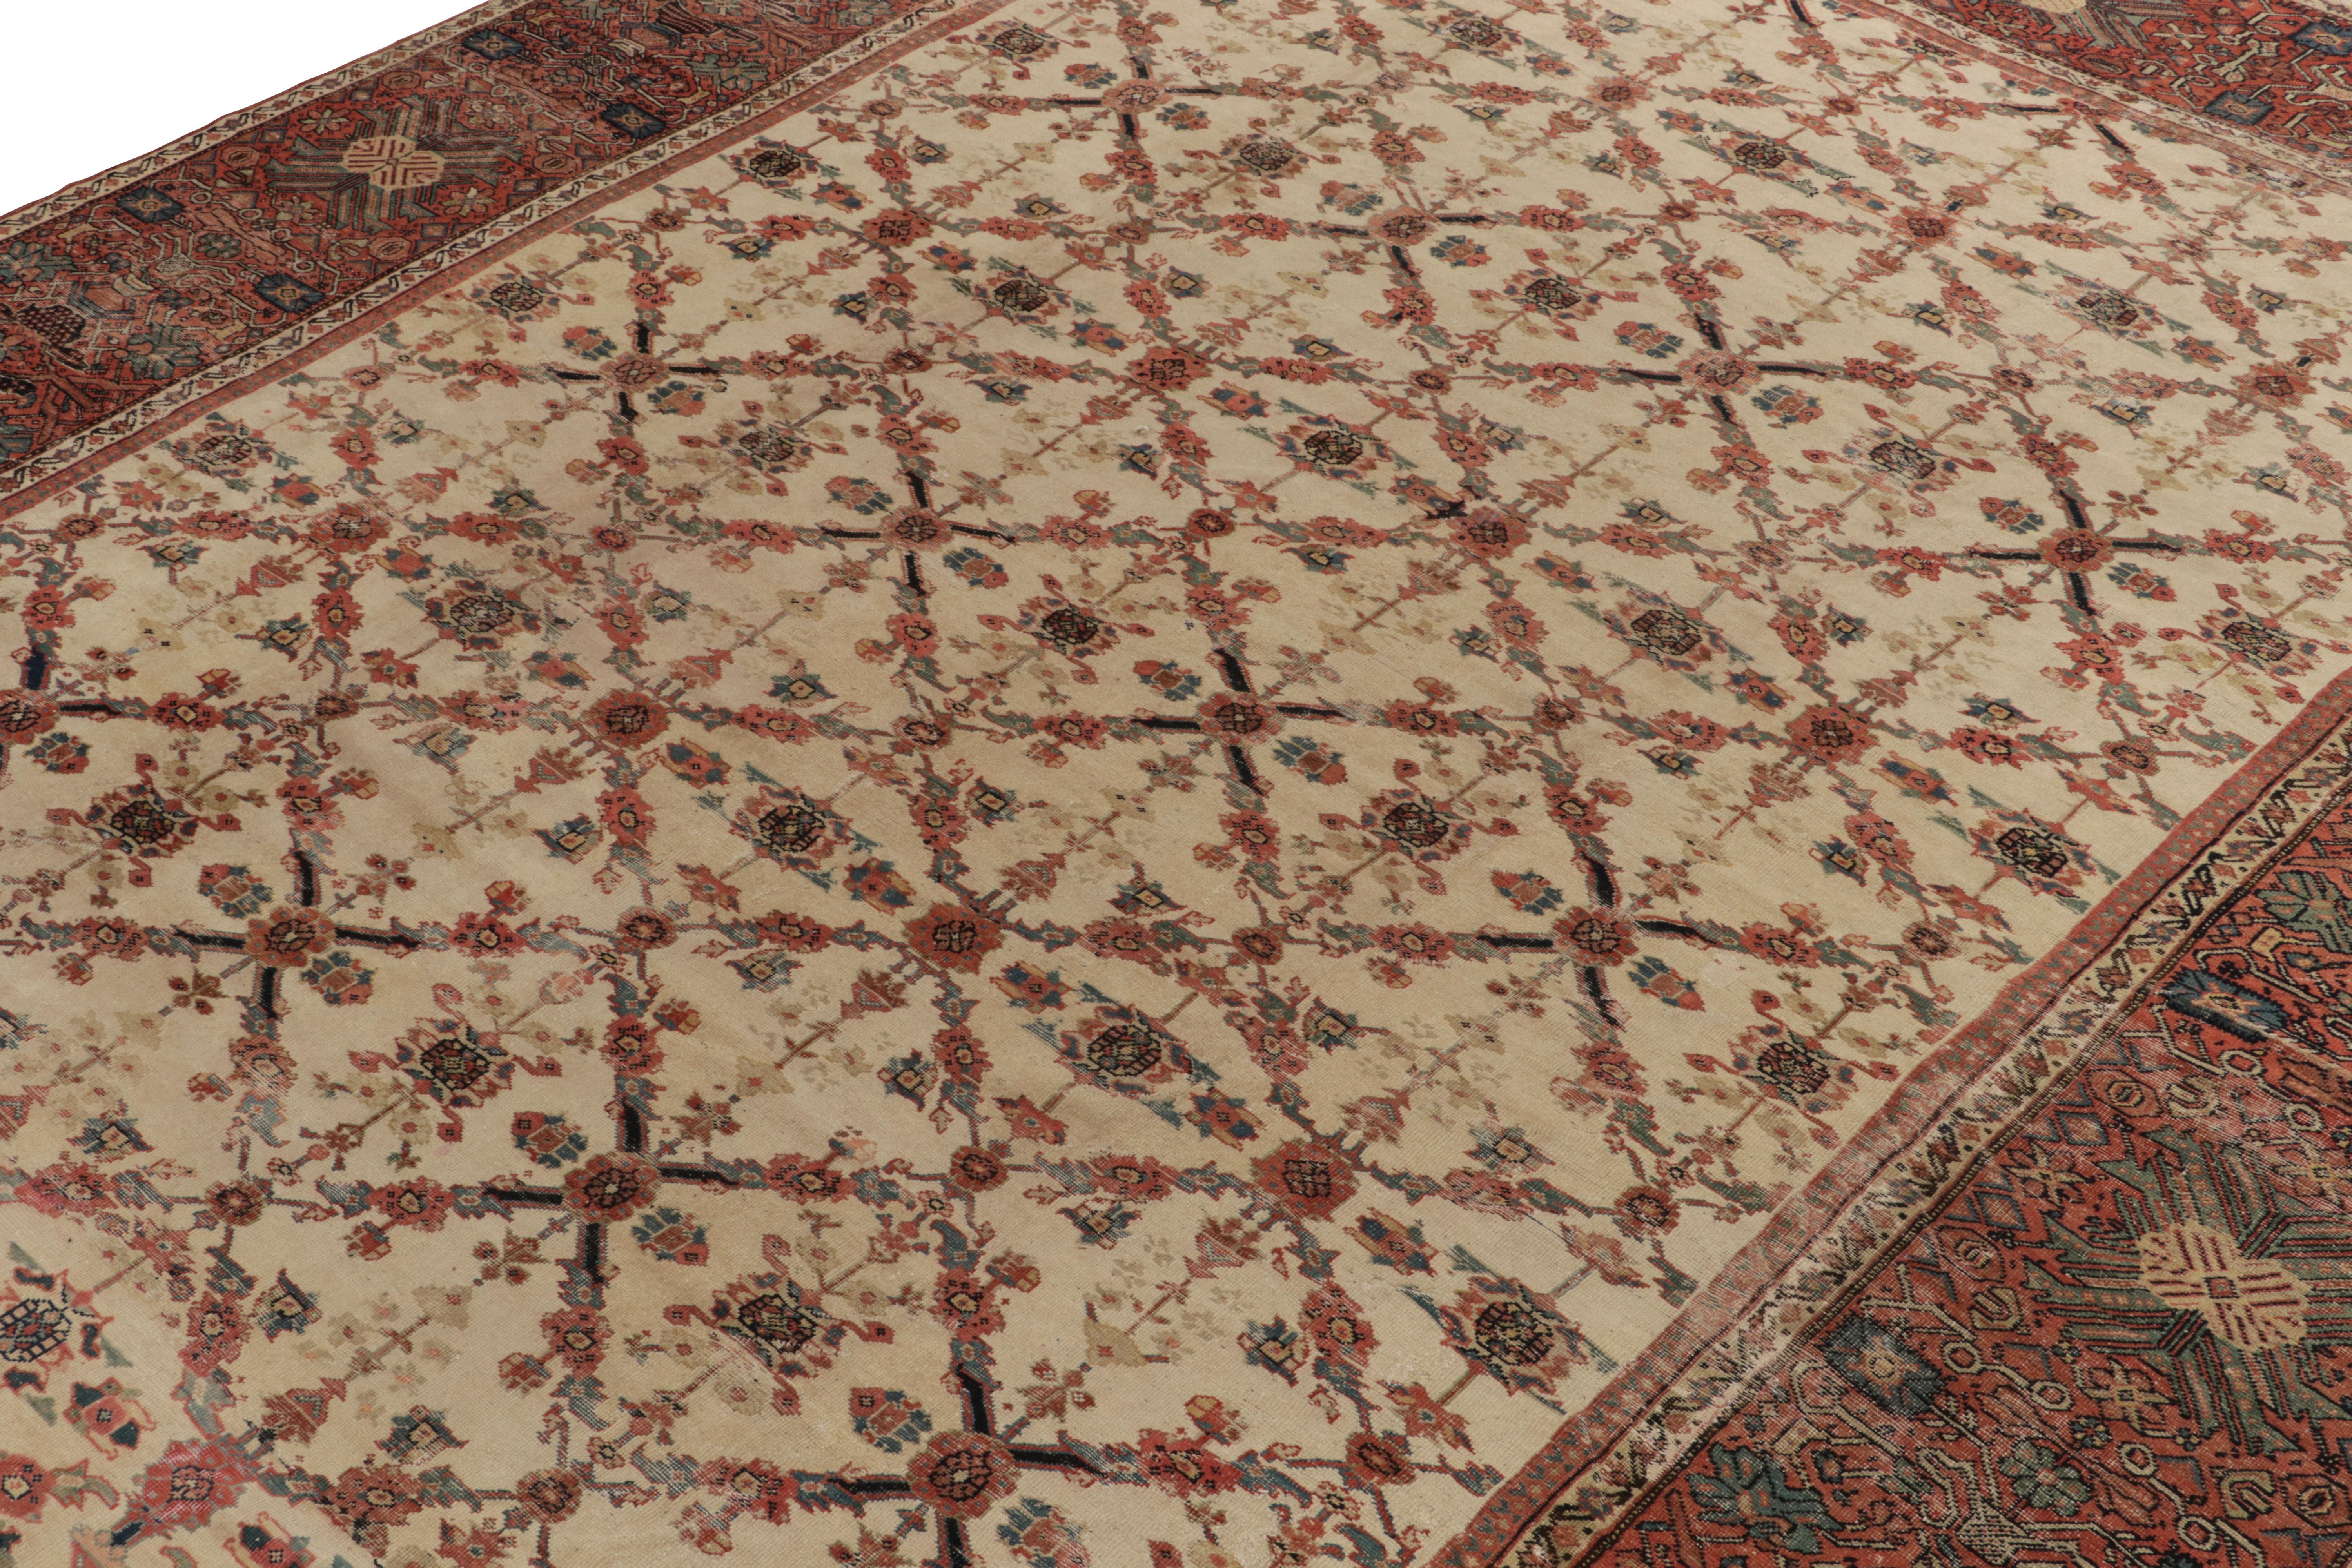 Antique Persian Sultanabad Rug in Beige and Red Floral Patterns In Good Condition For Sale In Long Island City, NY